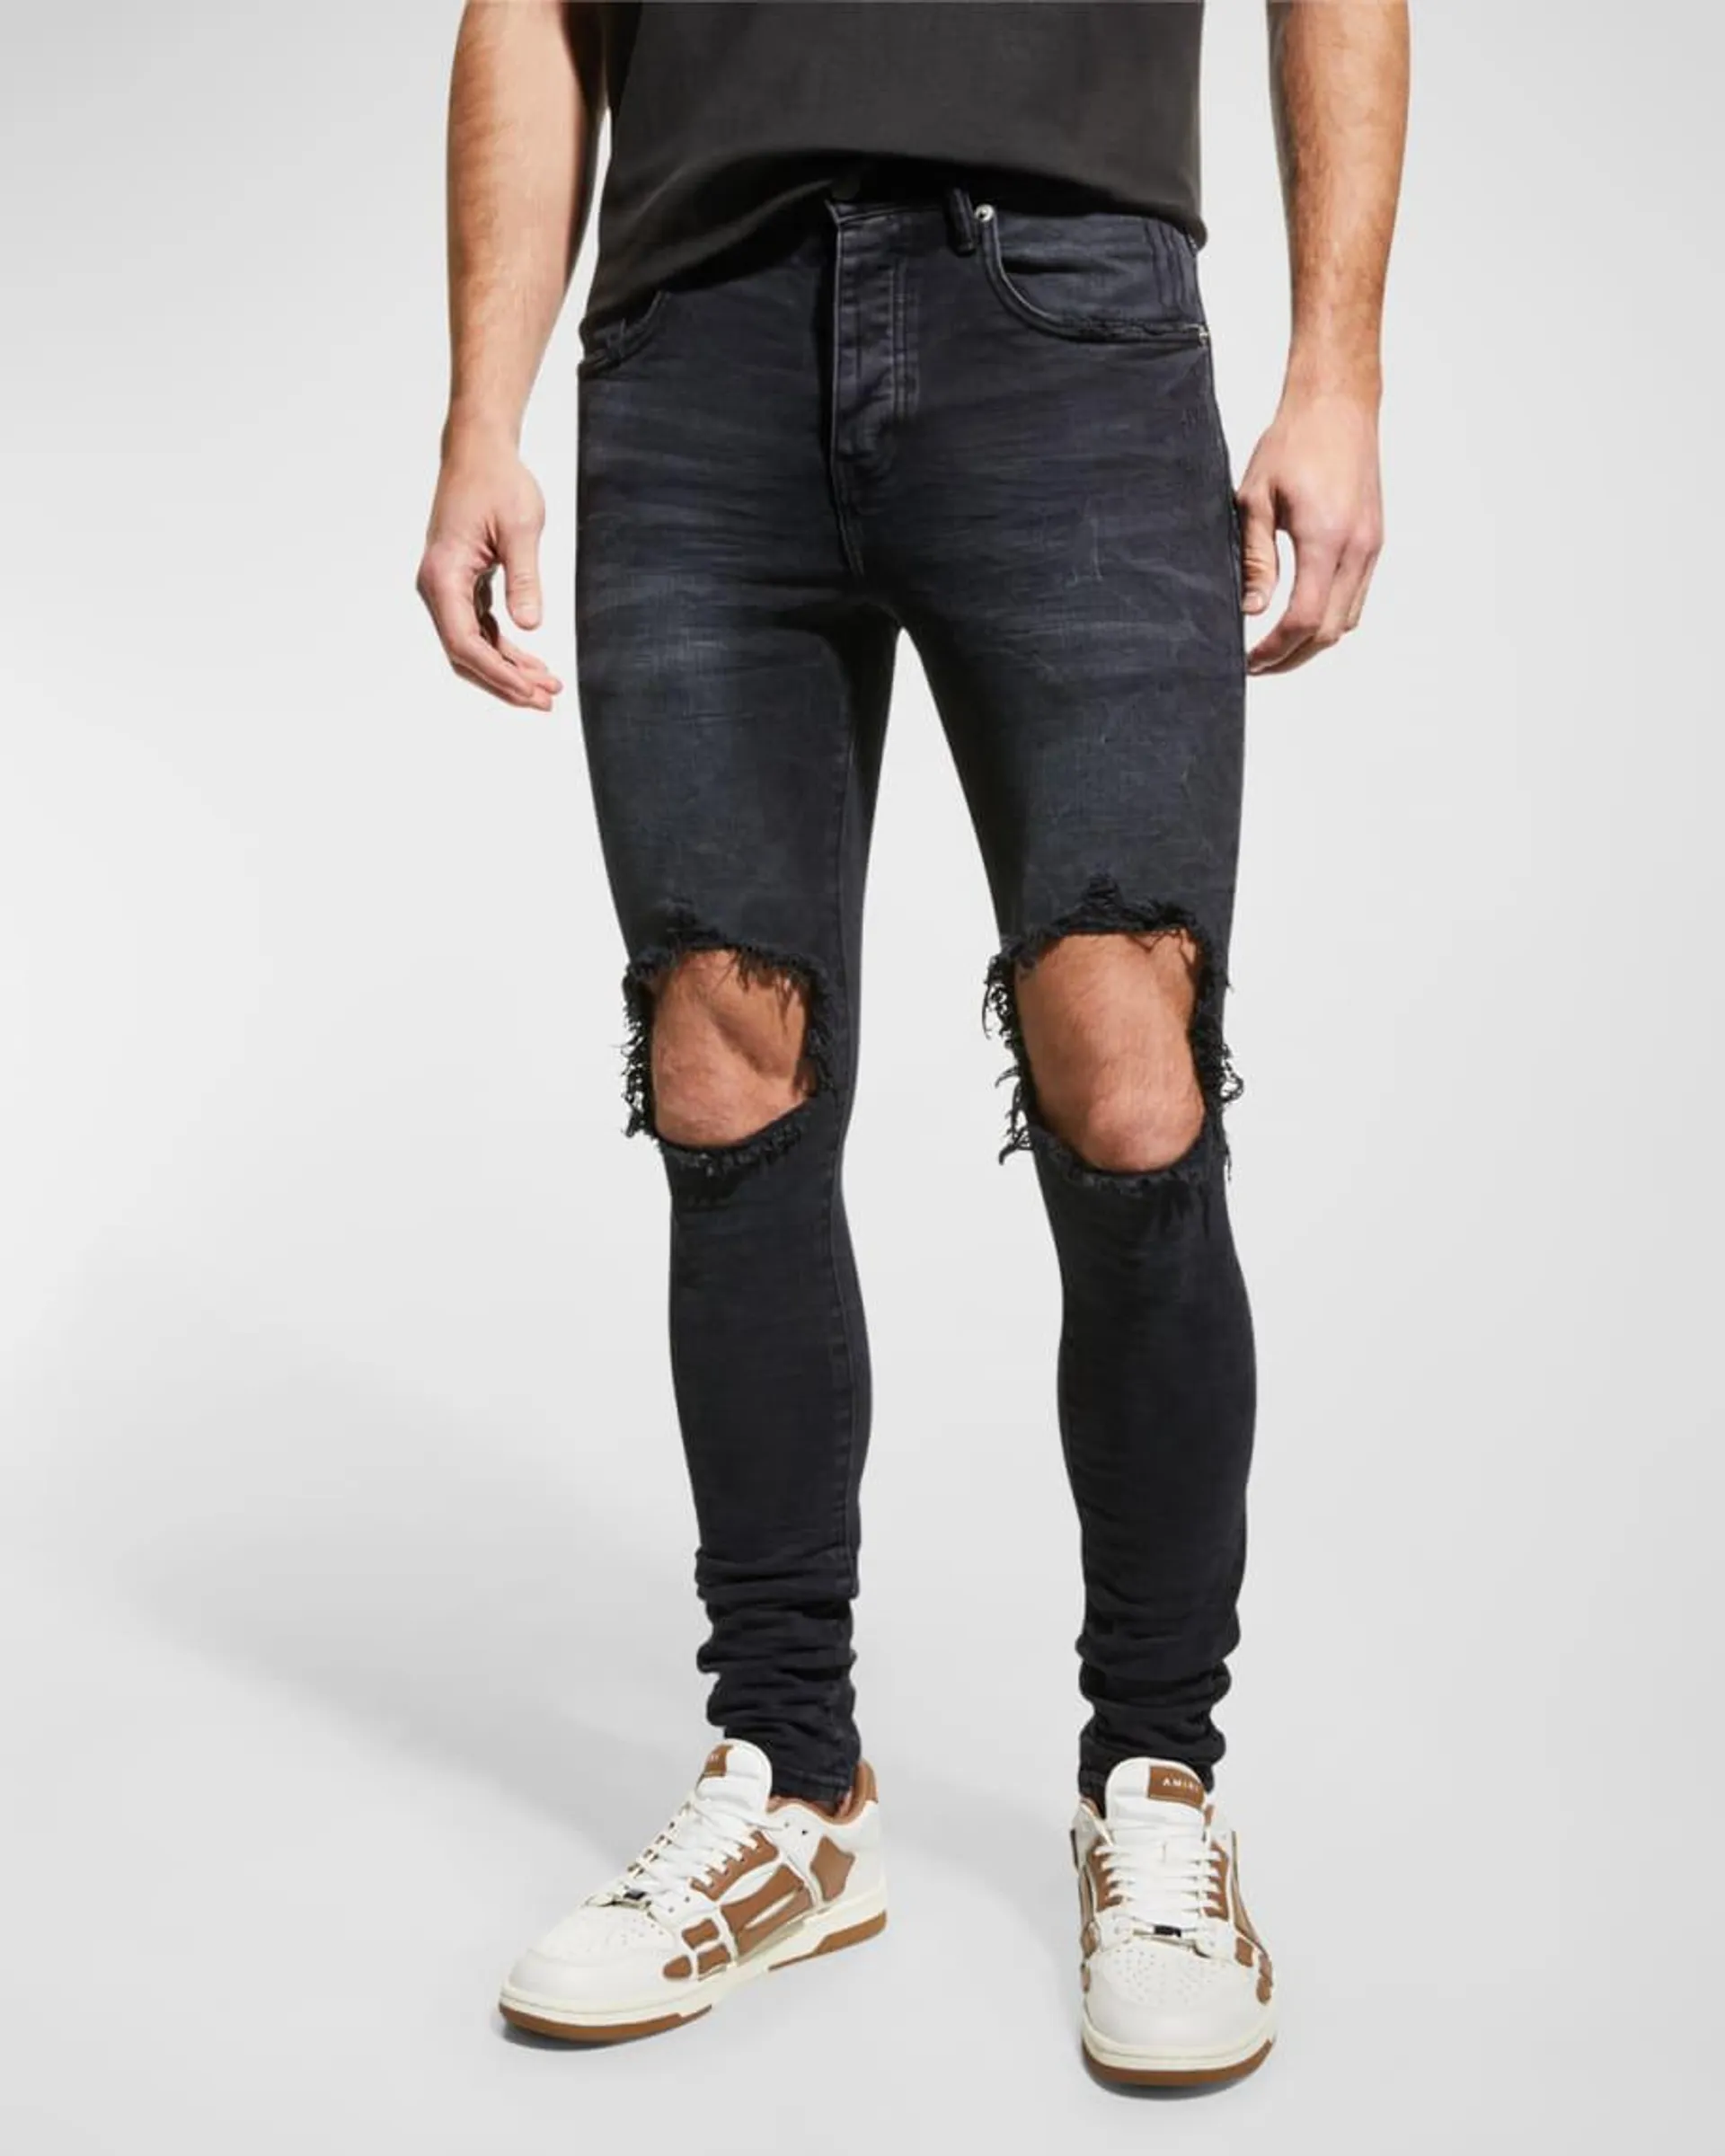 Men's Whiskered Blowout Skinny Jeans